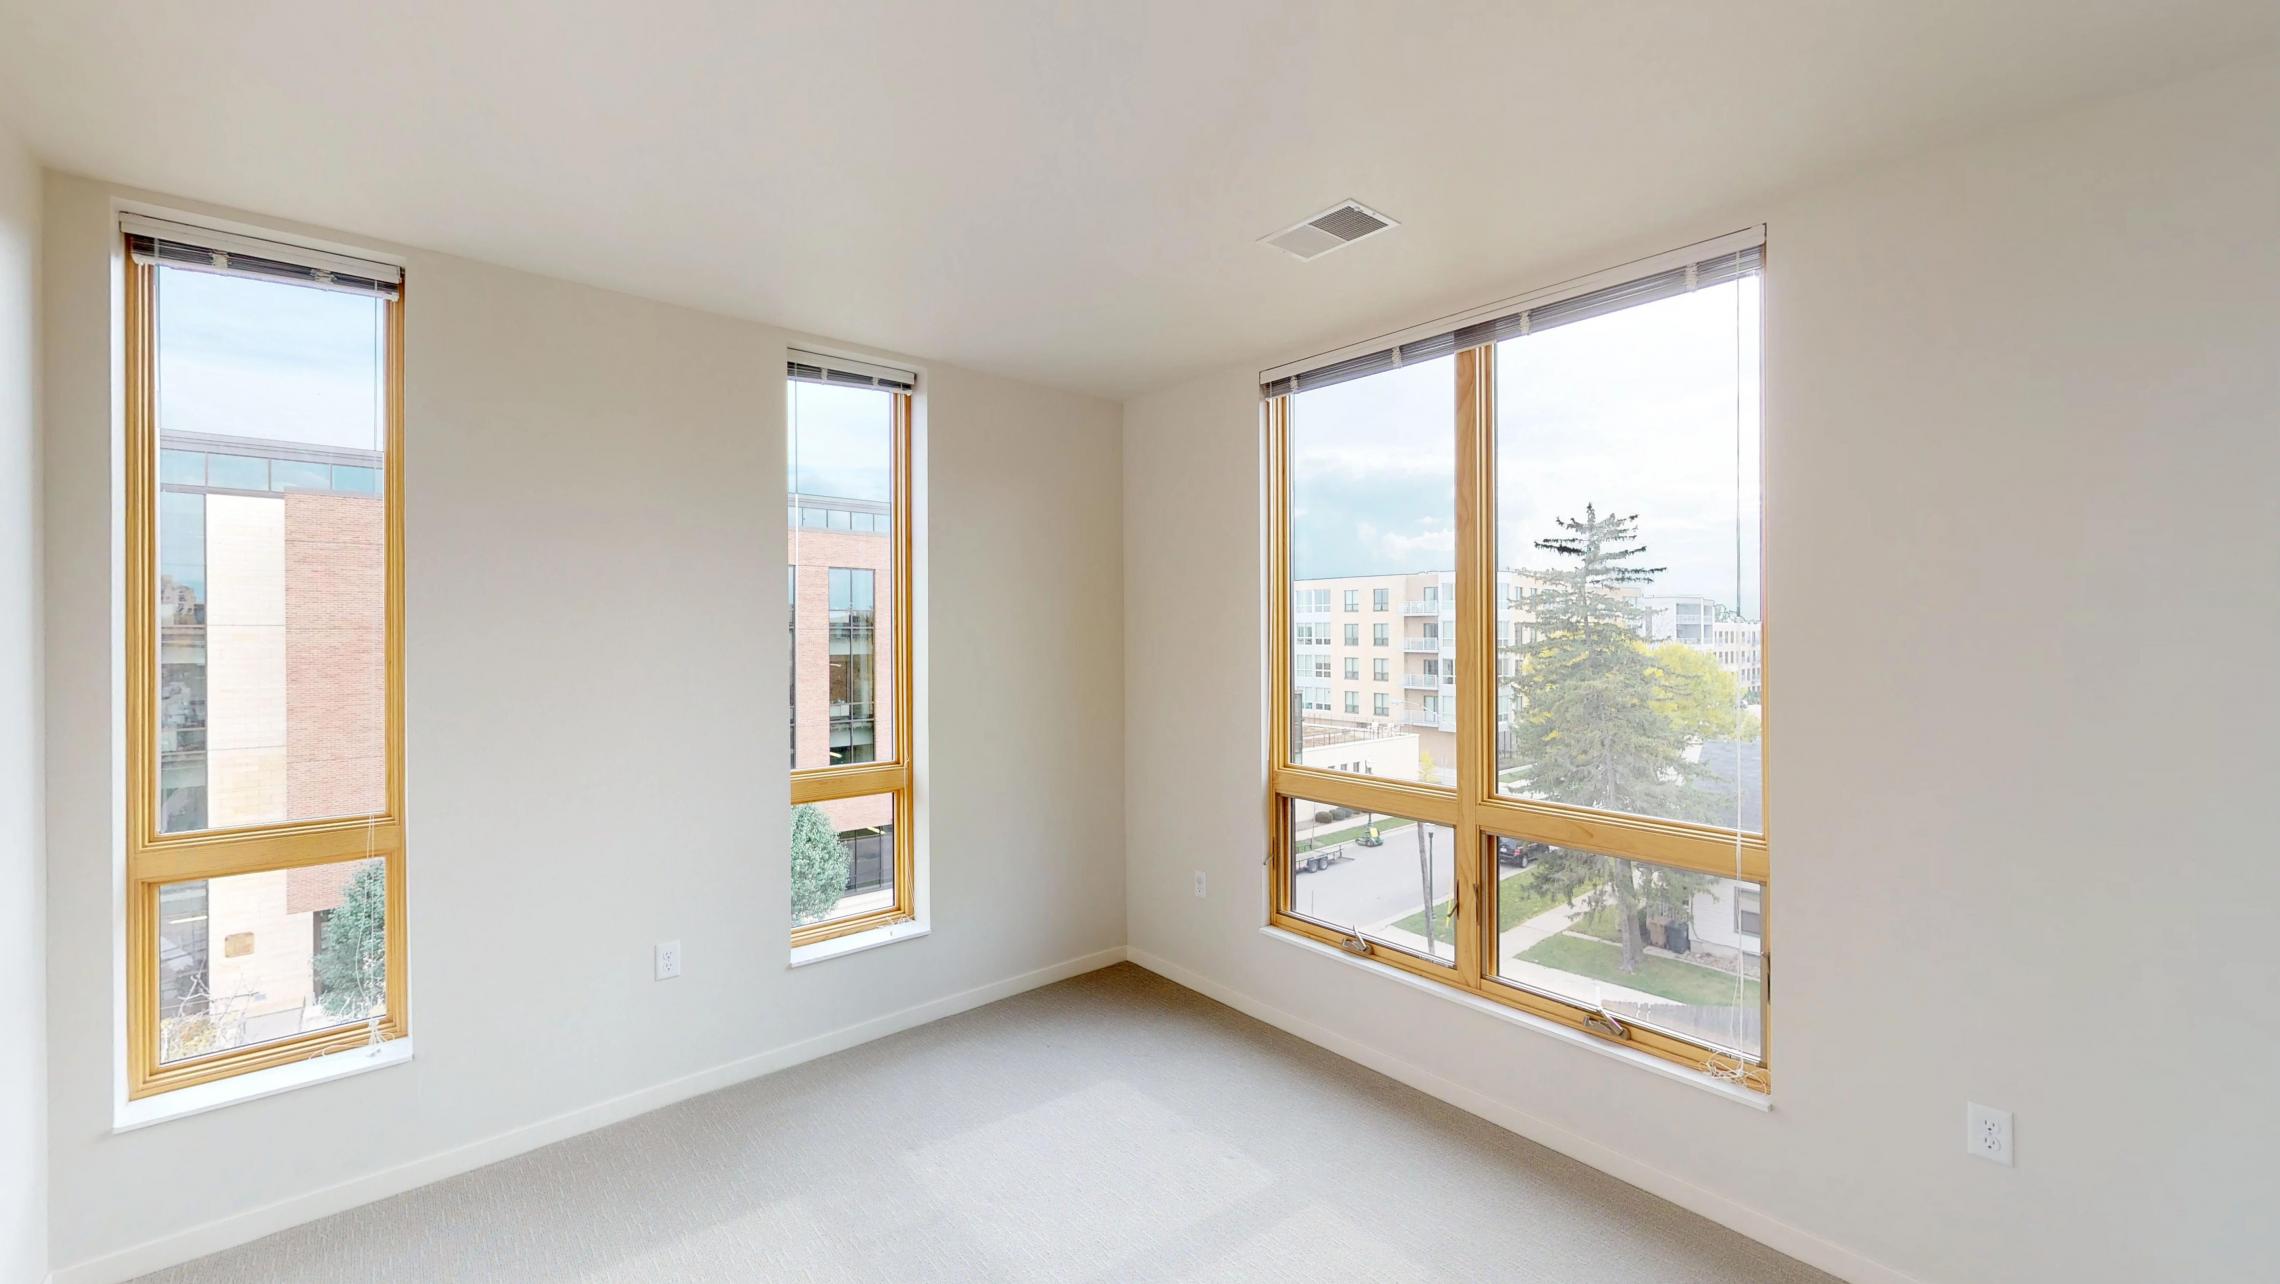 Quarter-Row-Apartments-Downtown-Madison-Capitol-Lake-Views-Balcony-Sun-Terrace-Courtyard-Fireplace-Dogs-Cats-Modern-Upscale-Apartment-401-Three-Bedroom-Two-Bathroom